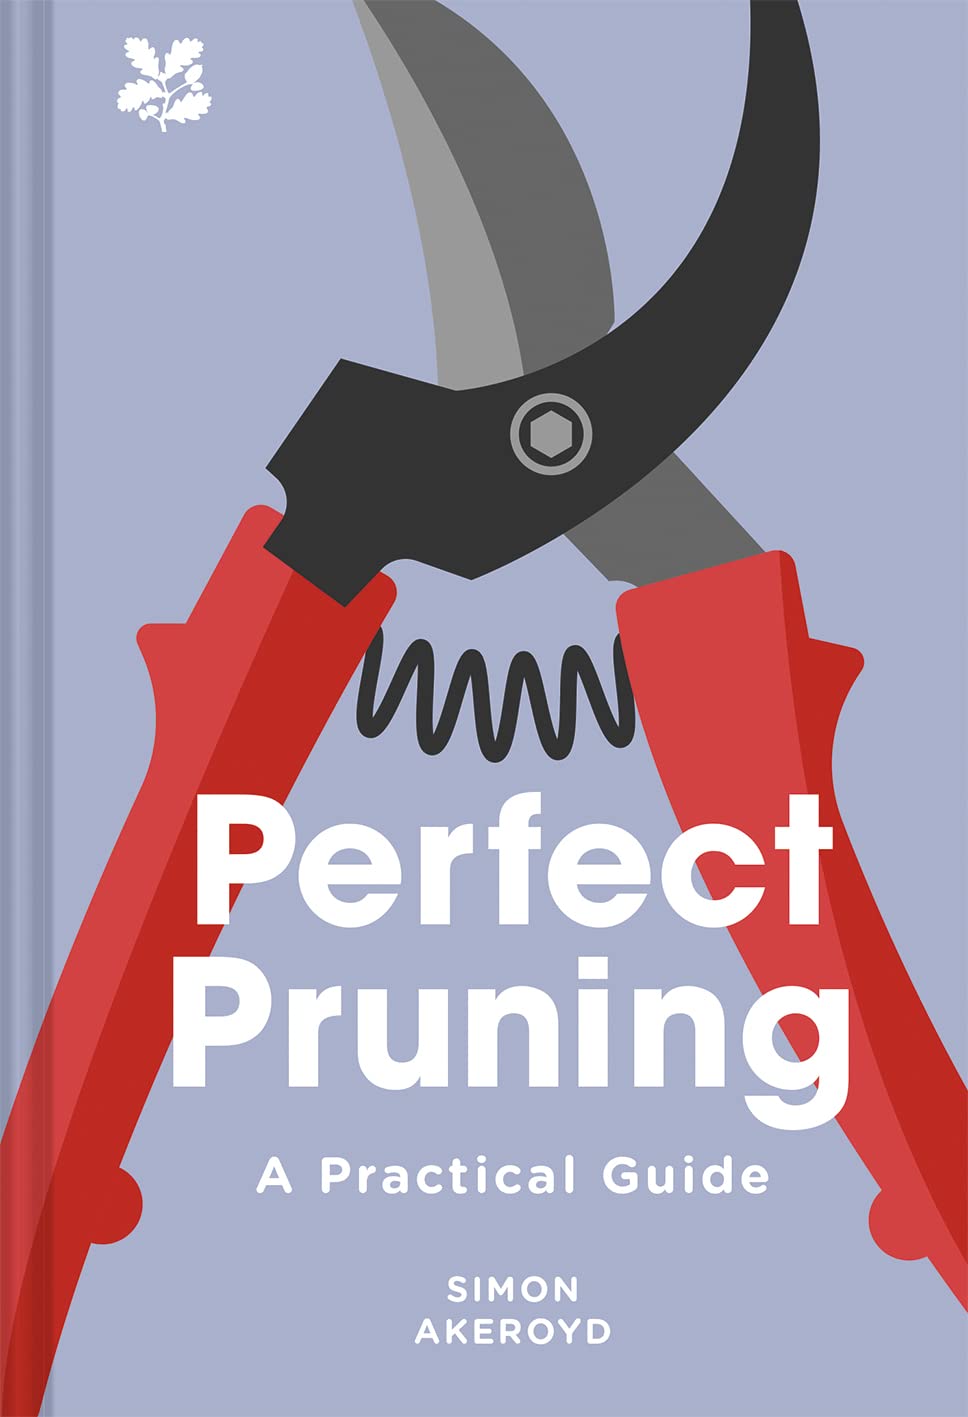 Perfect Pruning: A Practical Guide